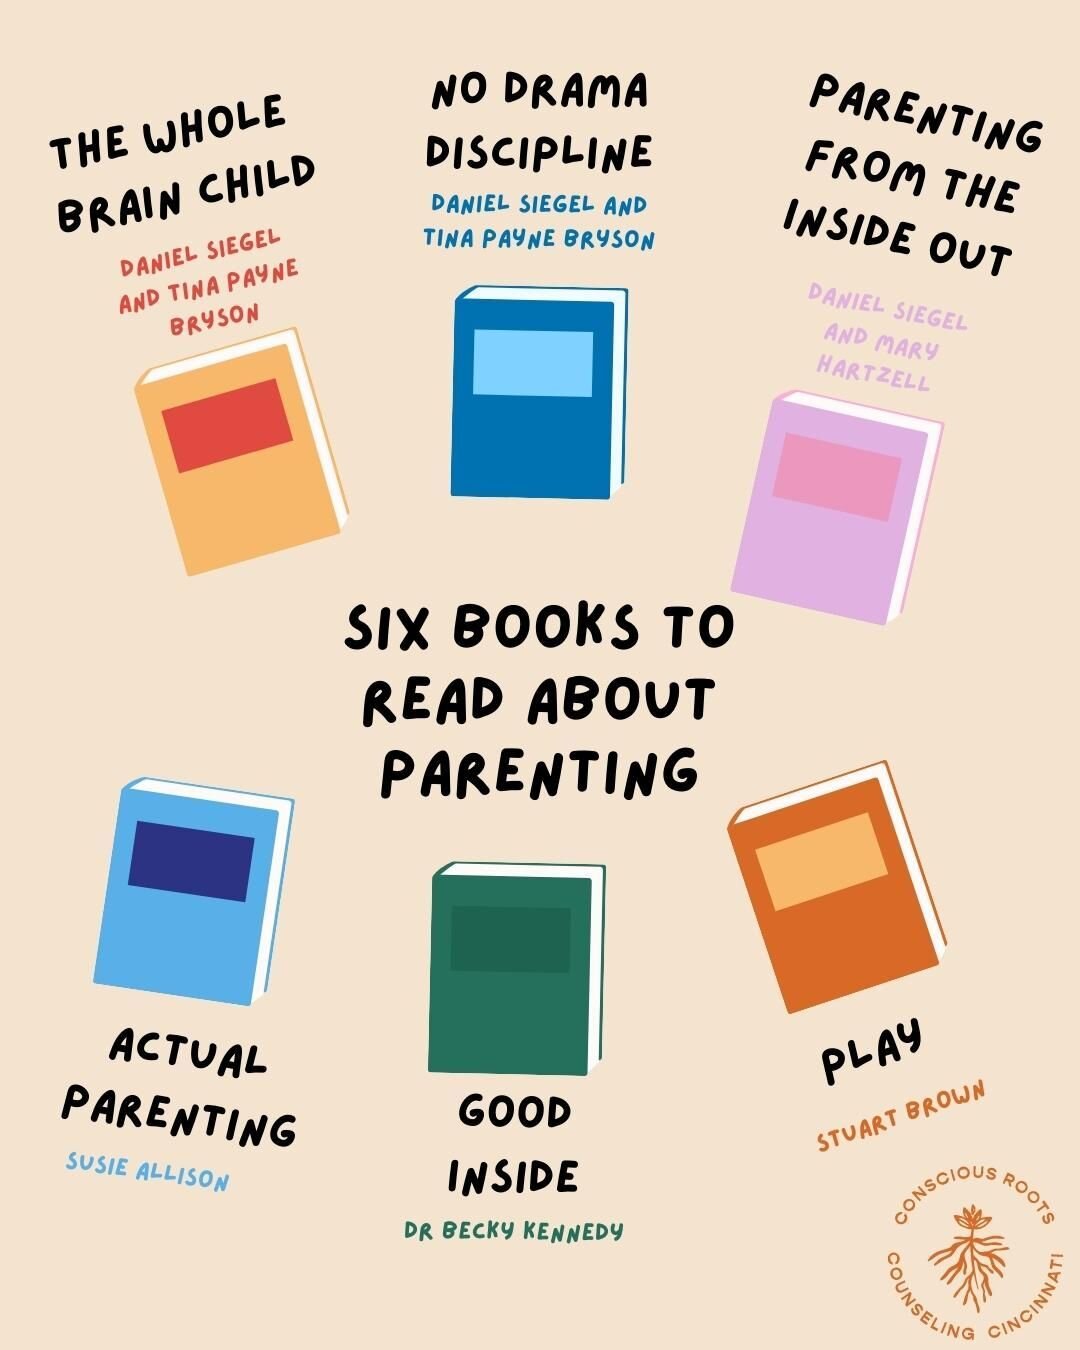 Ever wonder what books a therapist recommends to clients about parenting? Well here is a short list!

&quot;The Whole Brain Child&quot; by Daniel Siegel and Tina Payne Bryson

&quot;No Drama Discipline&quot; by Daniel Siegel and Tina Payne Bryson

&q